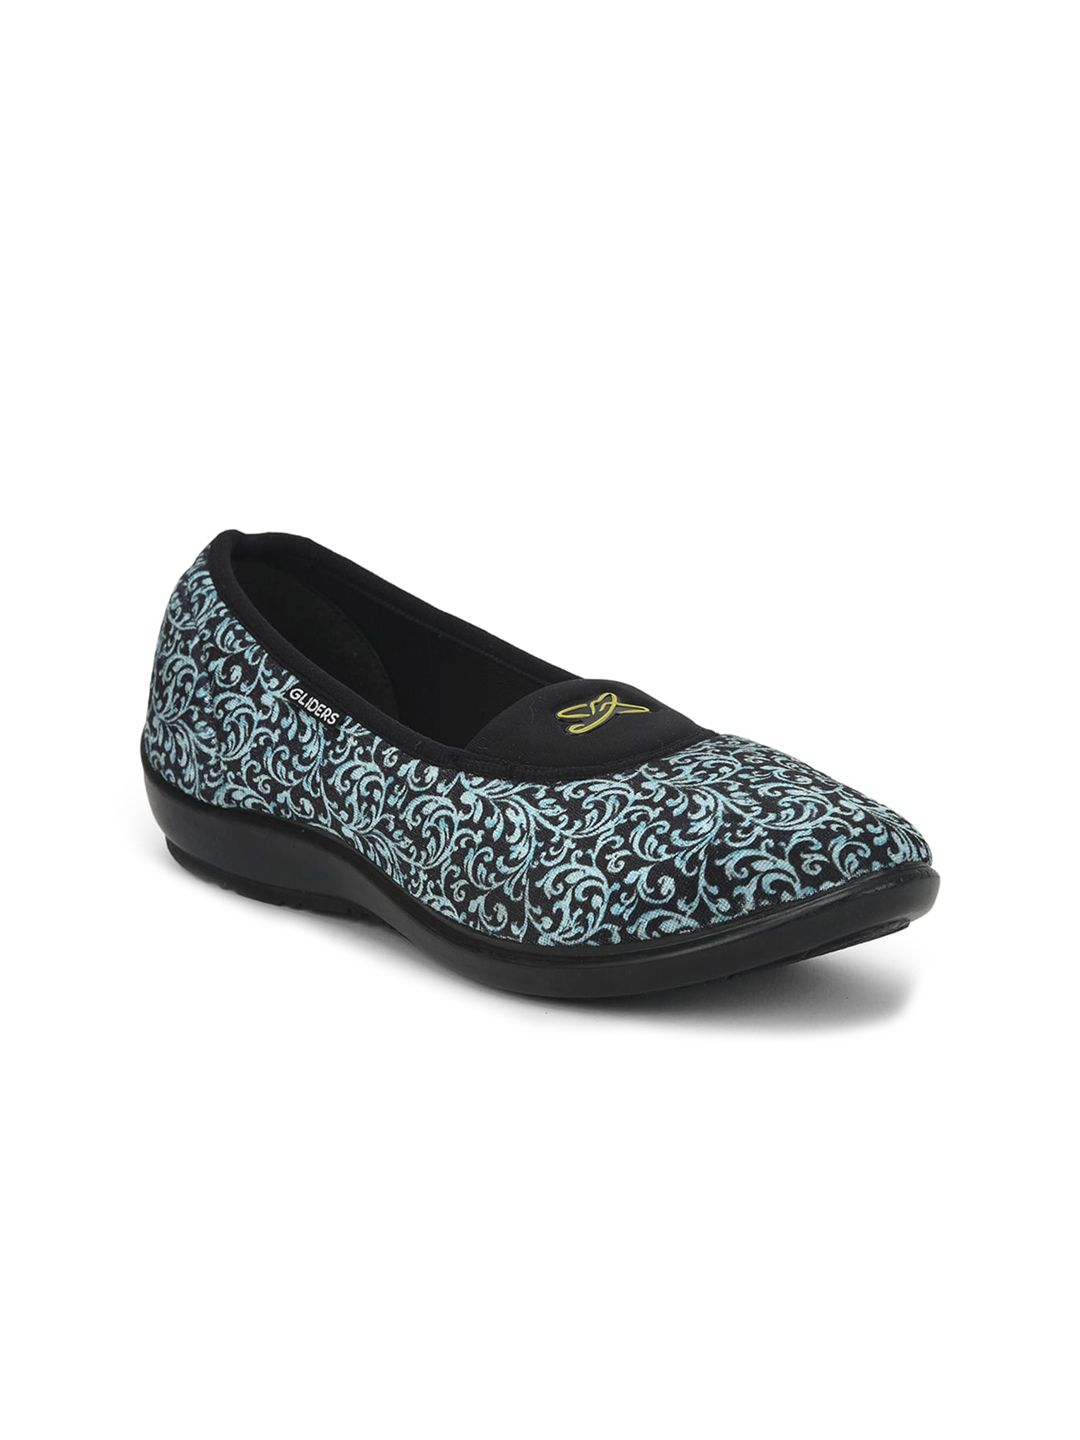 Liberty Women Blue Printed Slip-On Sneakers Price in India